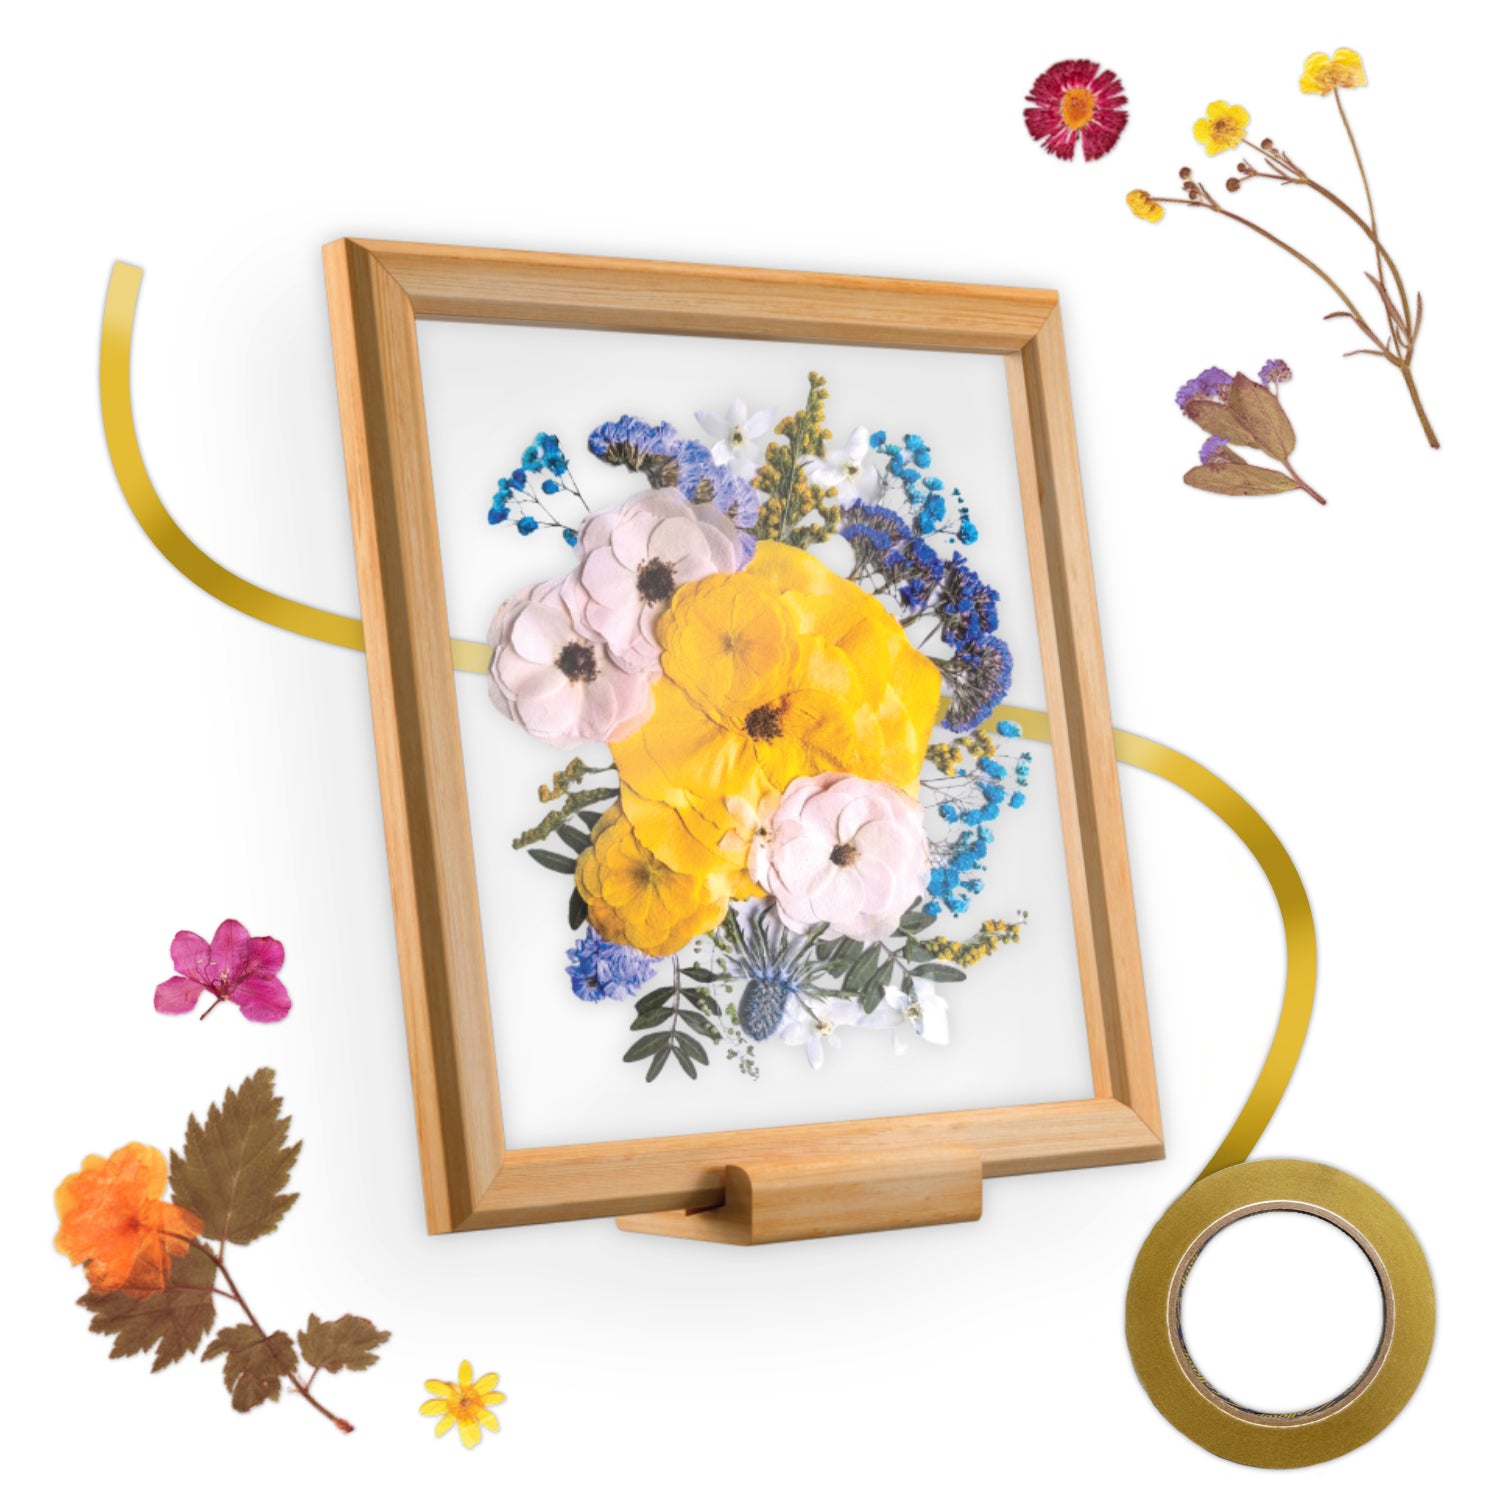 Wooden Floating Frame with UV-Resistant Acrylic - Versatile 12x12 inch Square Frame for Pressed Flowers, Photos & Artwork - Wall or Tabletop Display